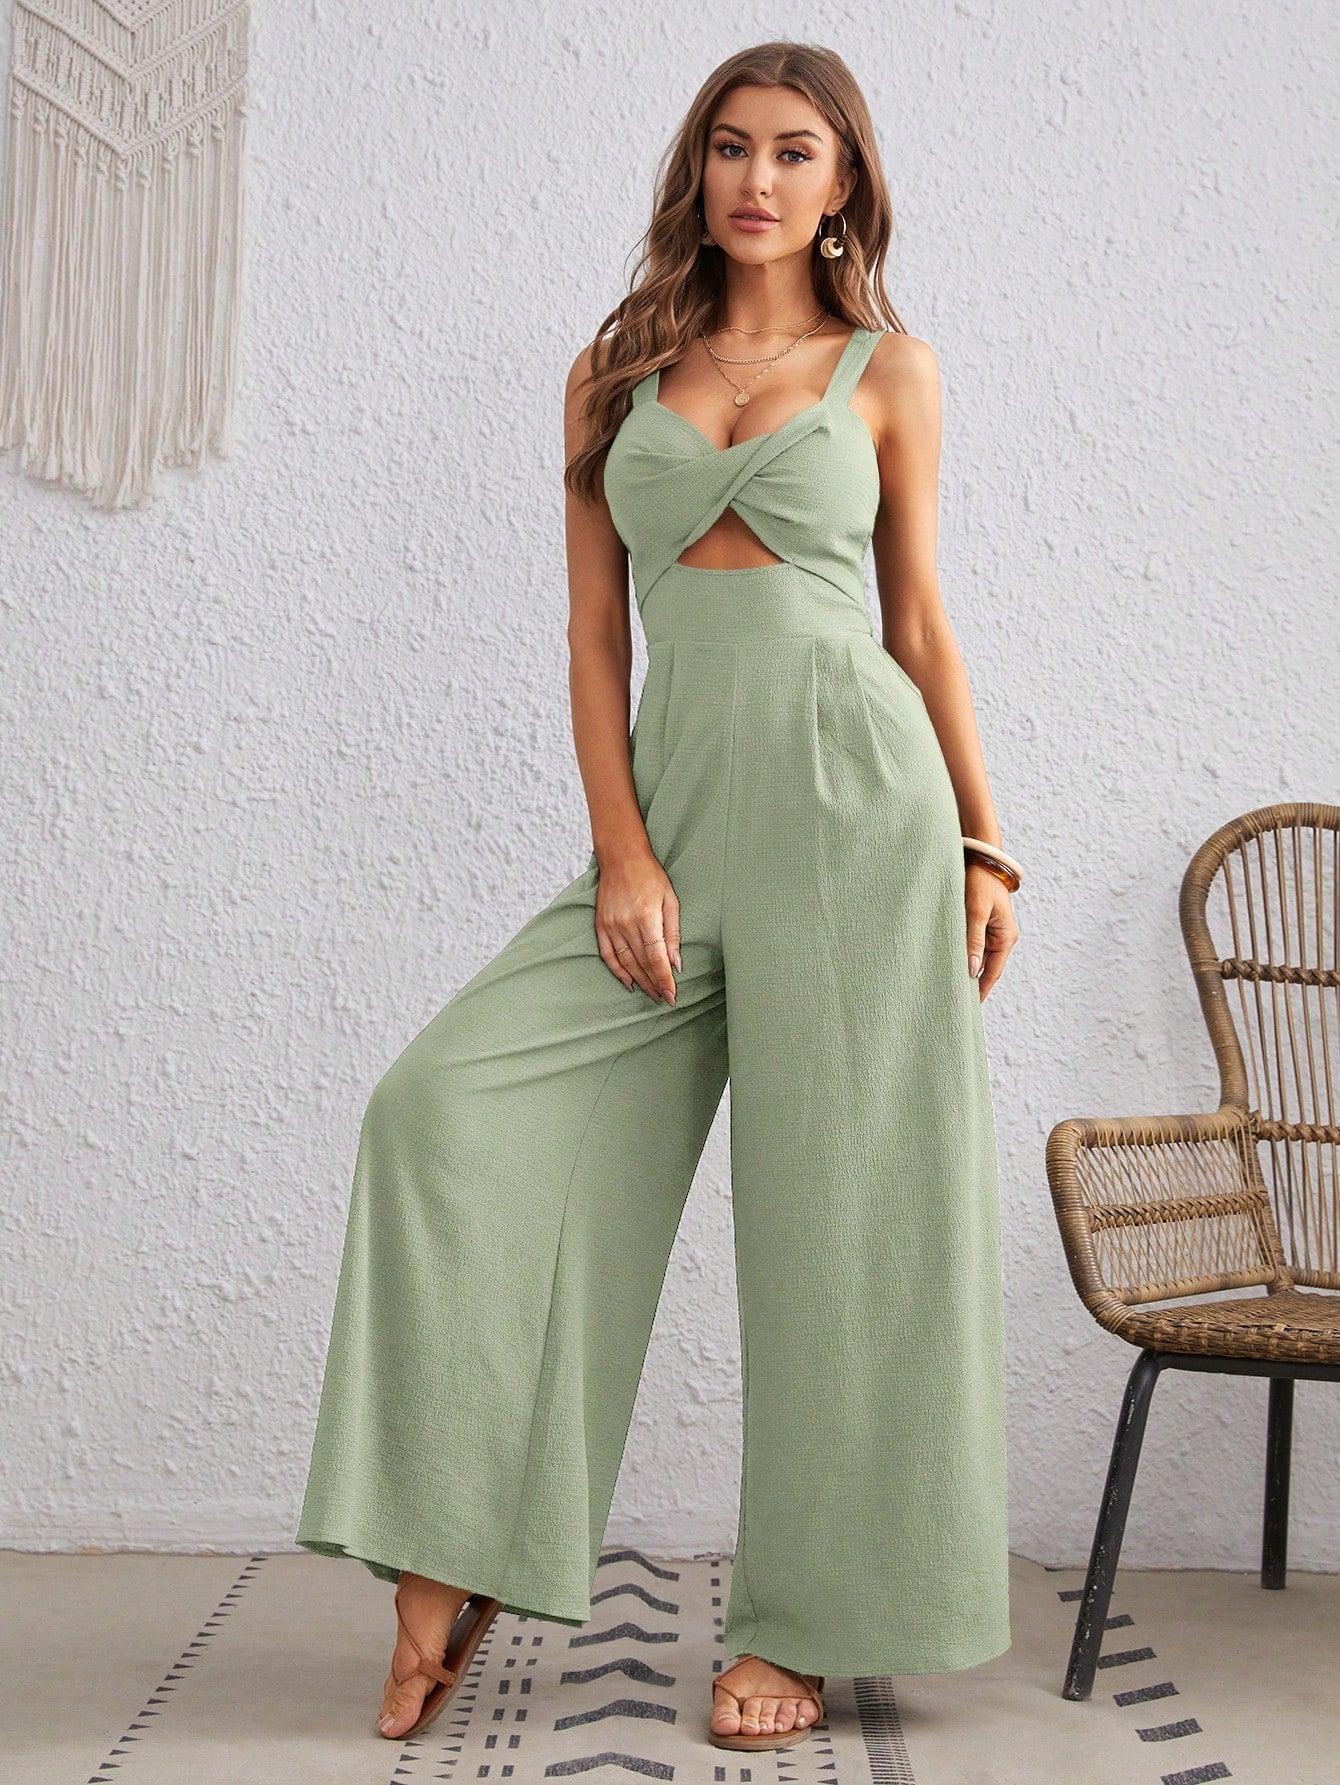 VCAY Women's Solid Color Loose Overall Jumpsuit With Spaghetti Straps